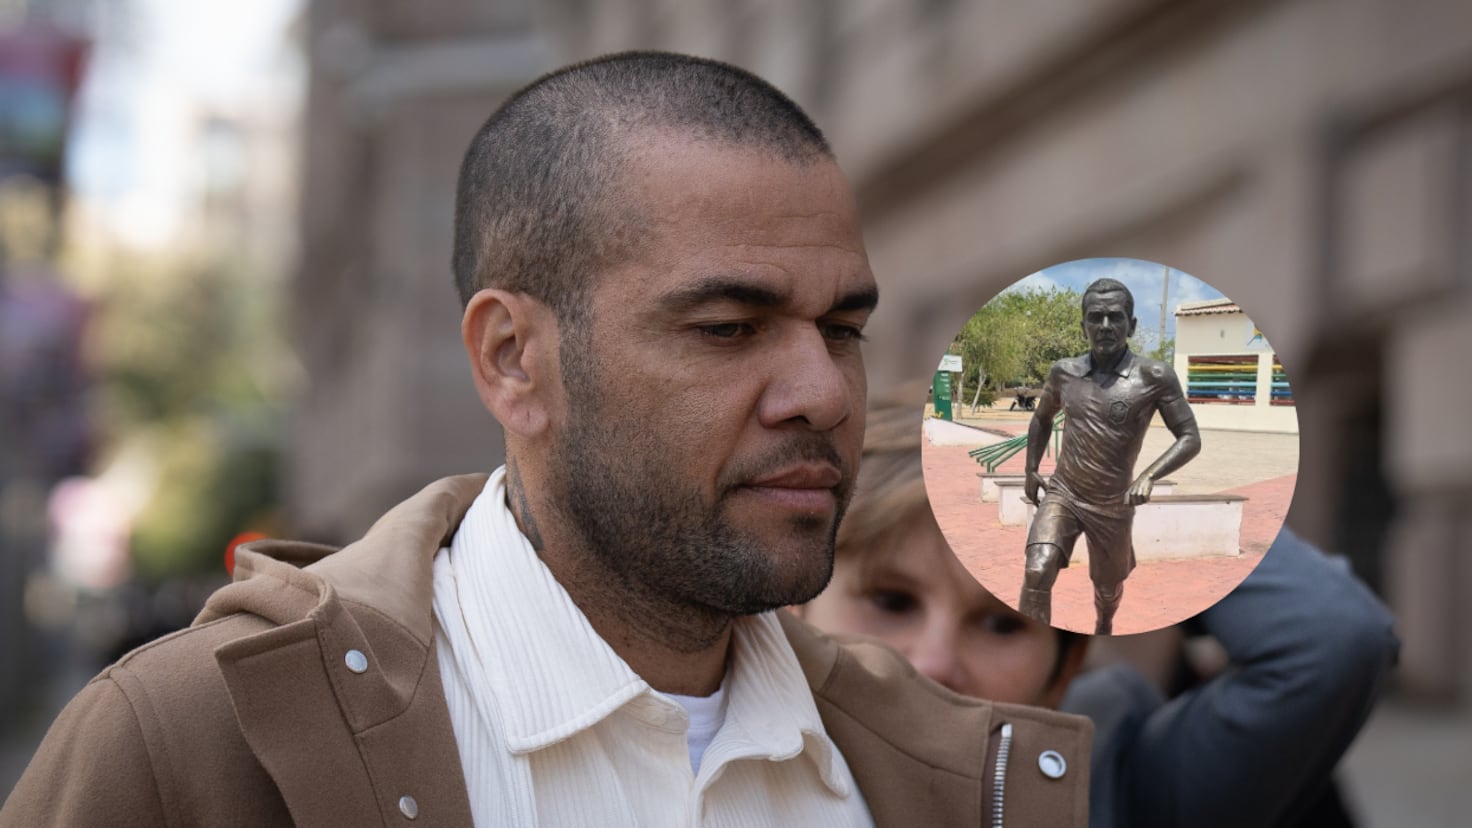 Brazilian Justice decides on the future of the statue of Dani Alves in his hometown
